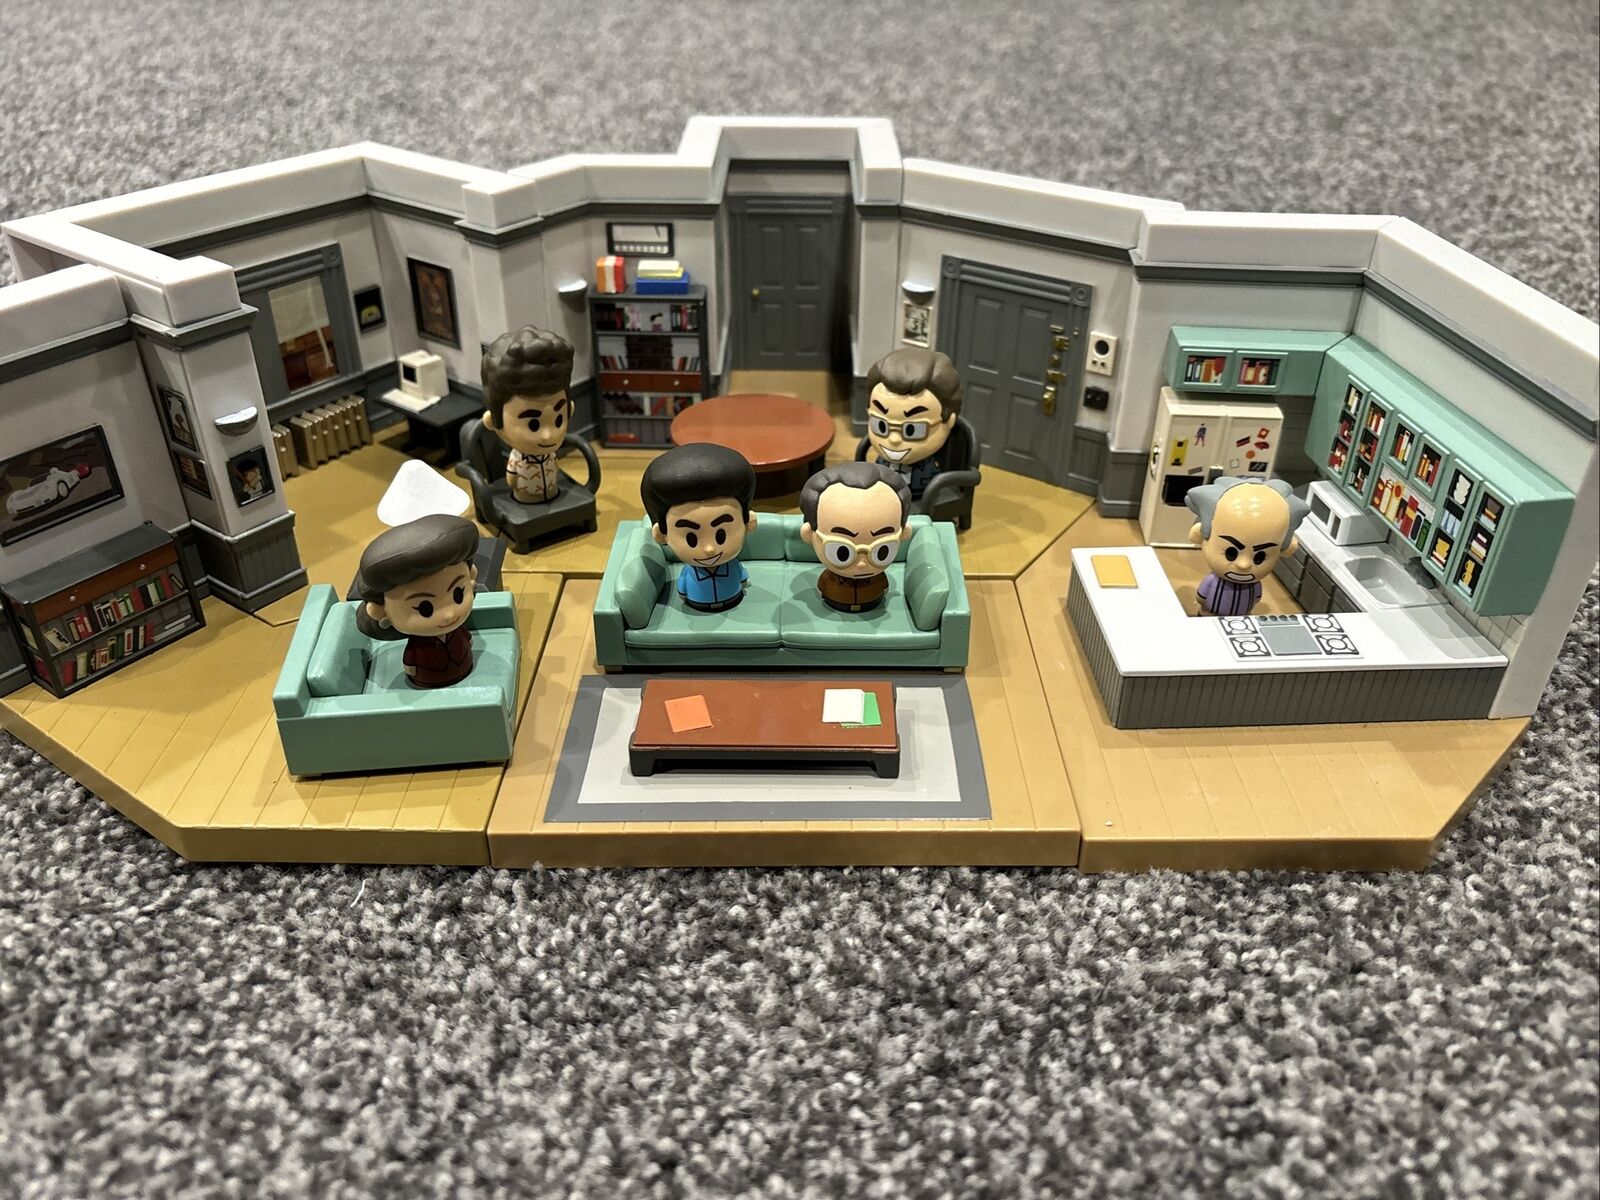 SEINFELD SET - Funko Mini Moments Lot Of 6 Forms Complete Set Jerry’s Apartment